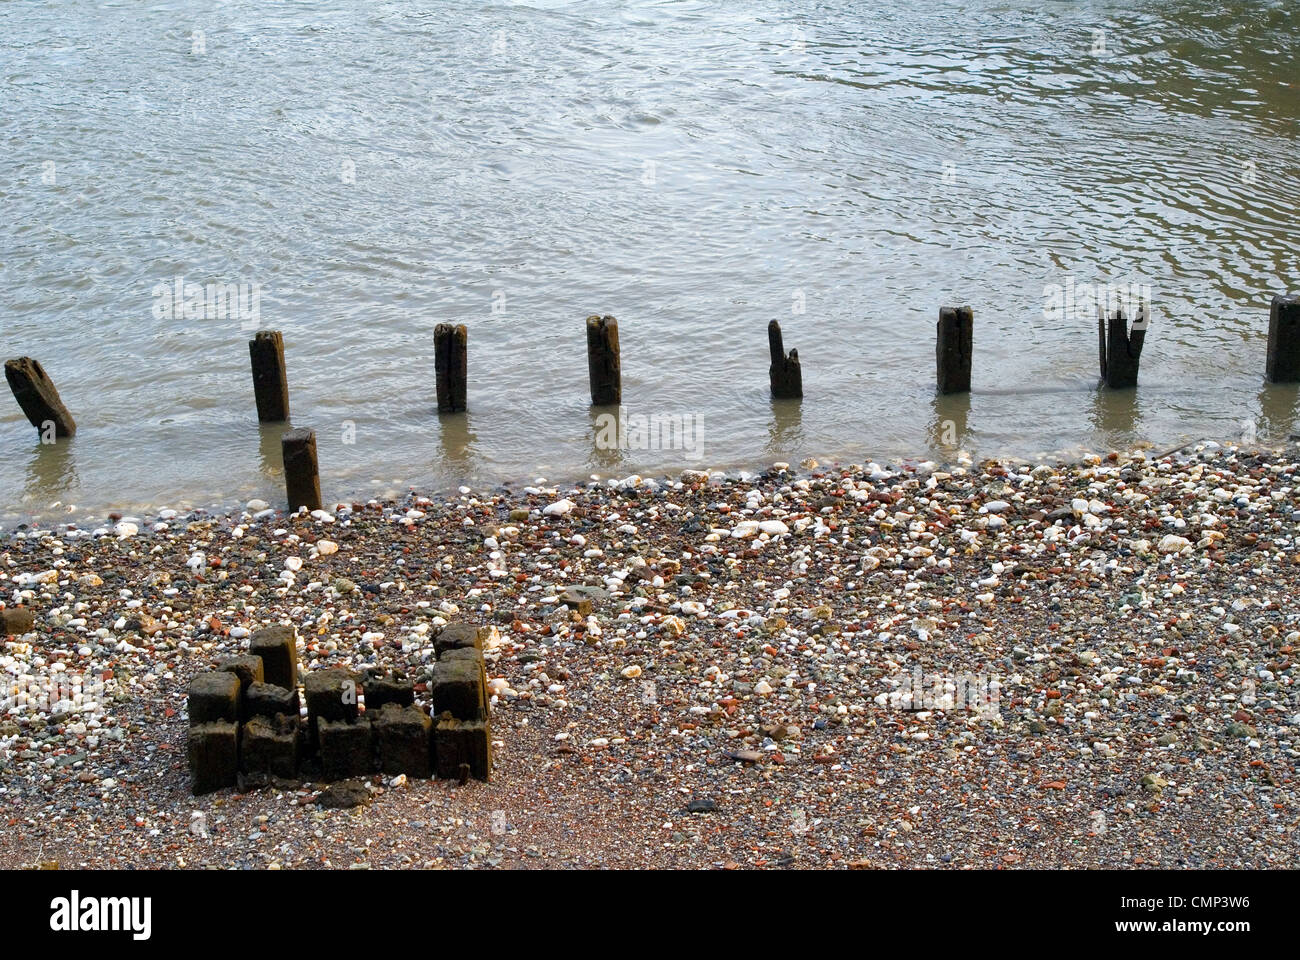 Thames view with remains Stock Photo